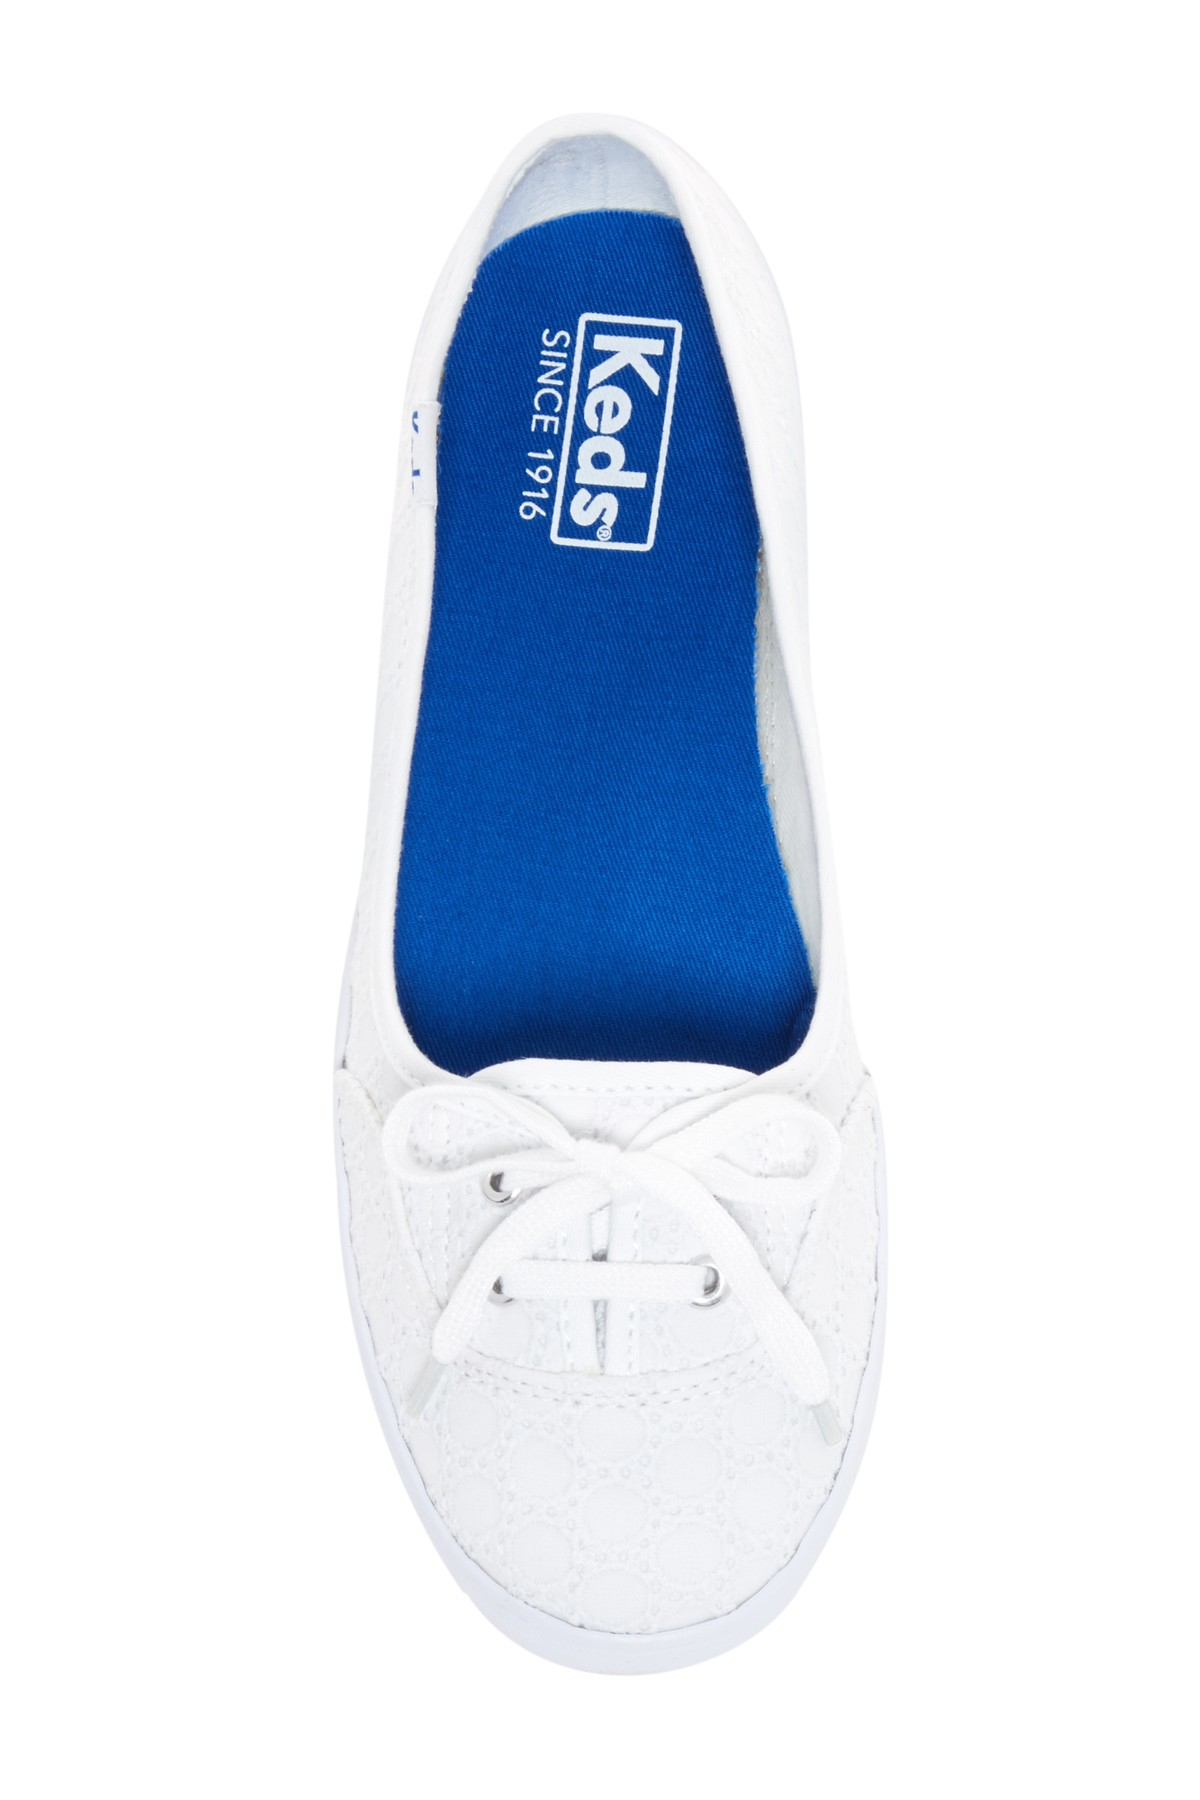 Keds Women's Teacup Twill Sneakers in White